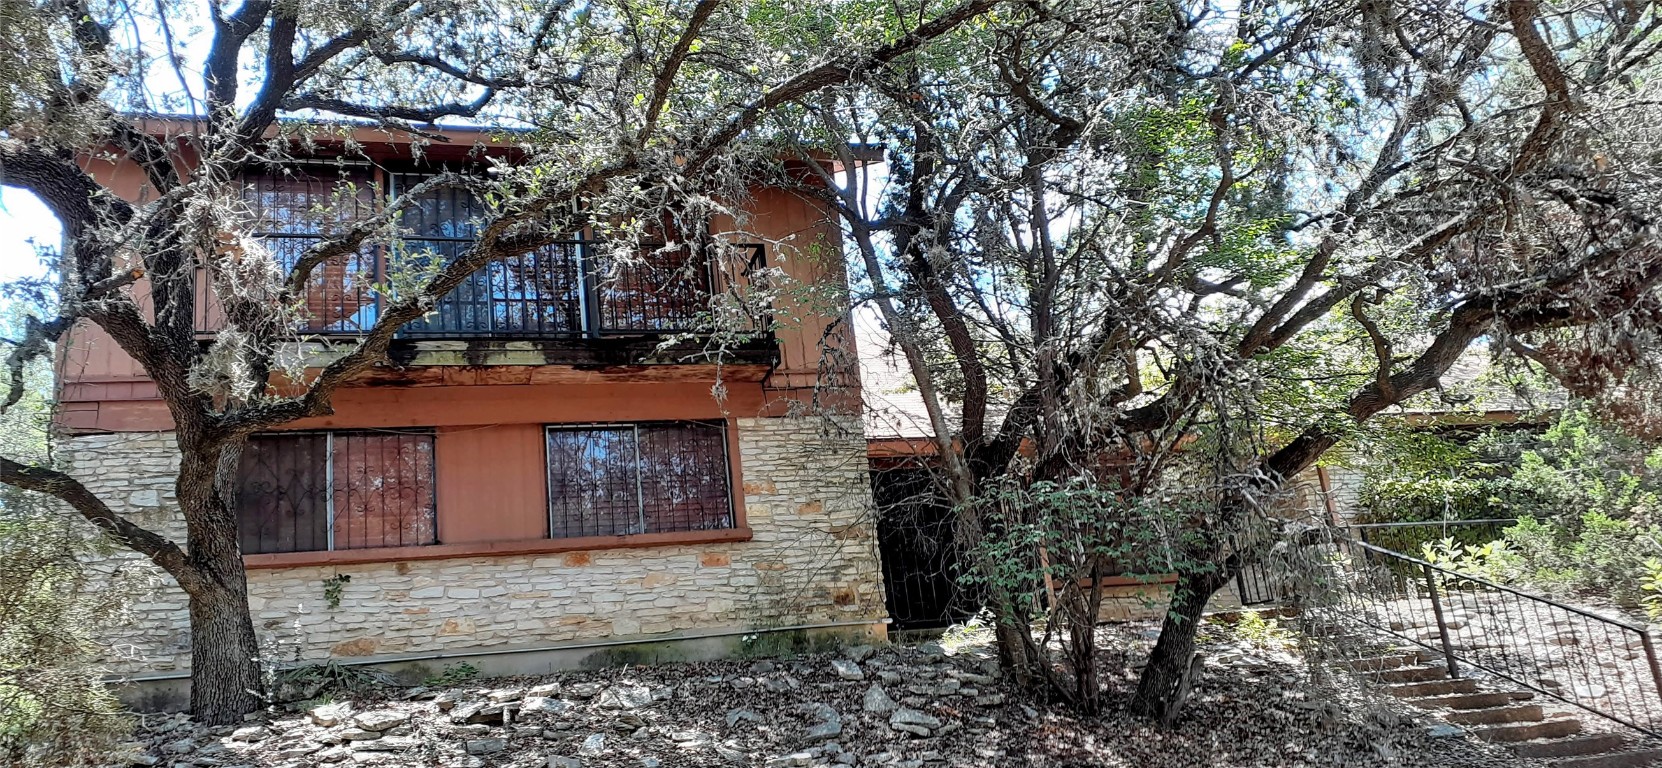 a view of a house with a tree